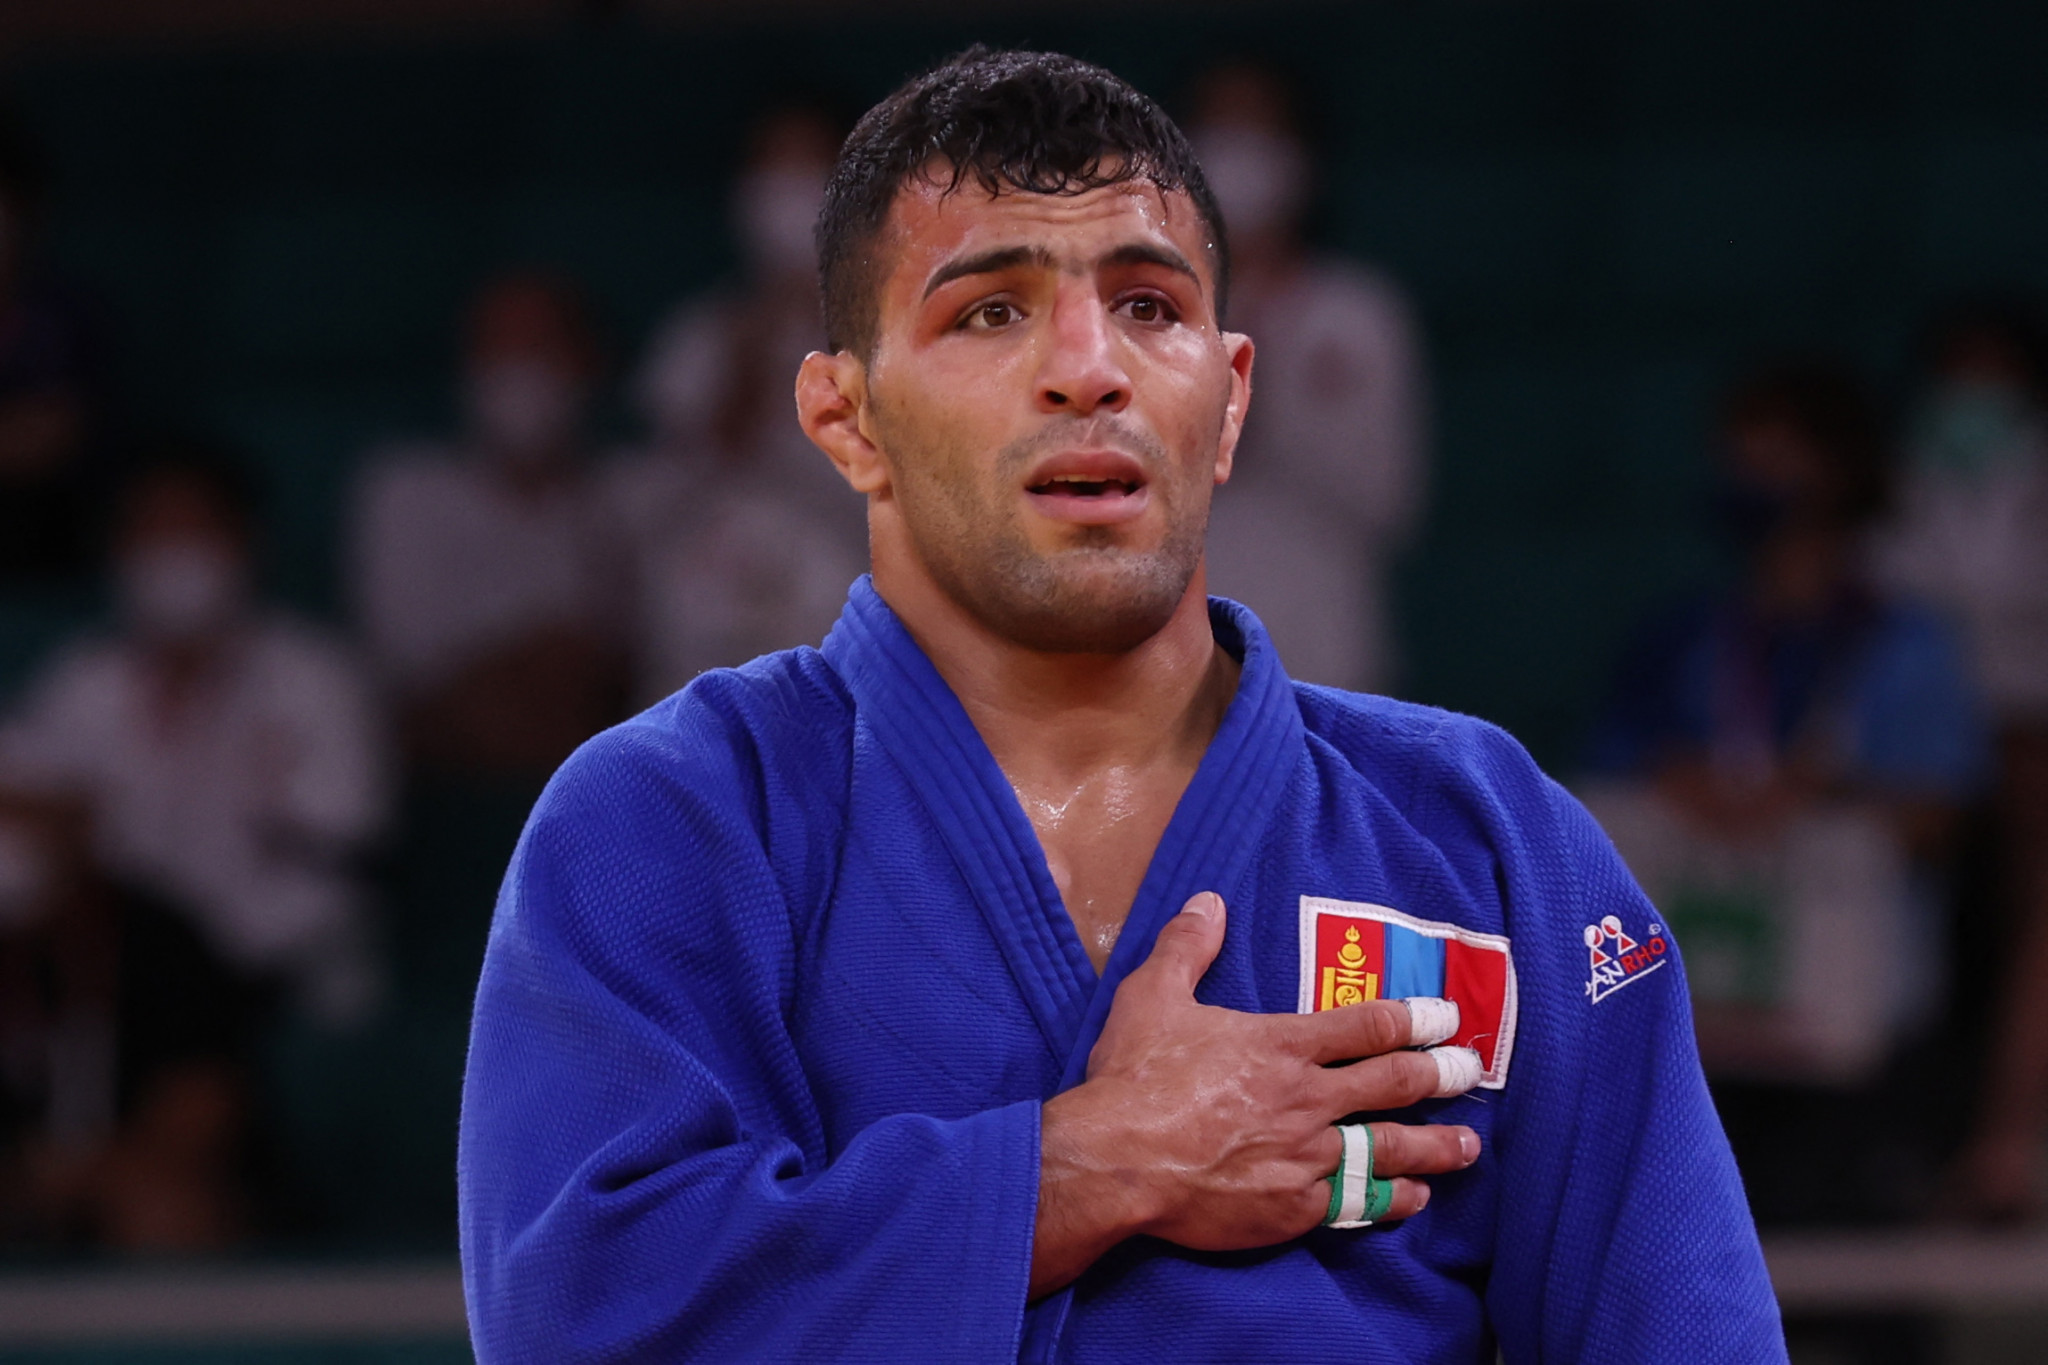 Judoka Mollaei set to represent third nation at Olympics after IOC approves switch to Azerbaijan